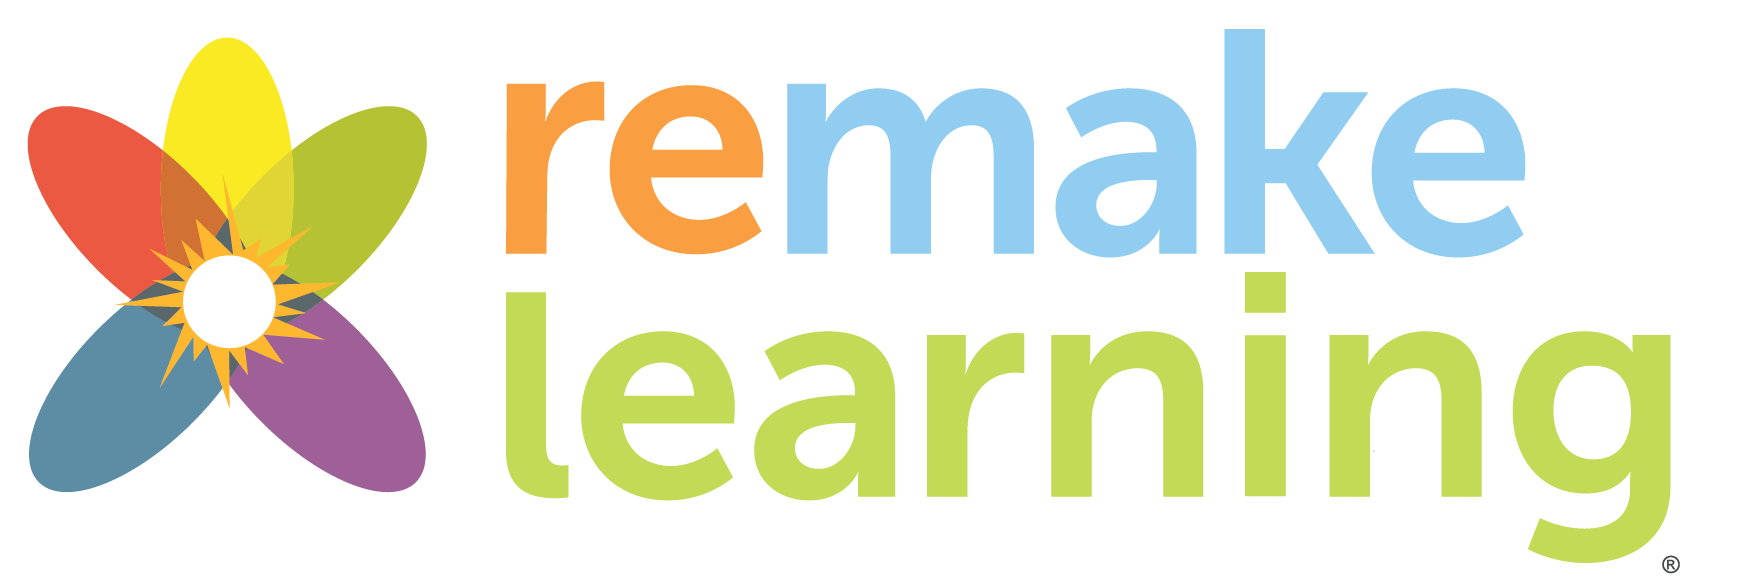 Secondary-Remake-Learning_logo_color.png